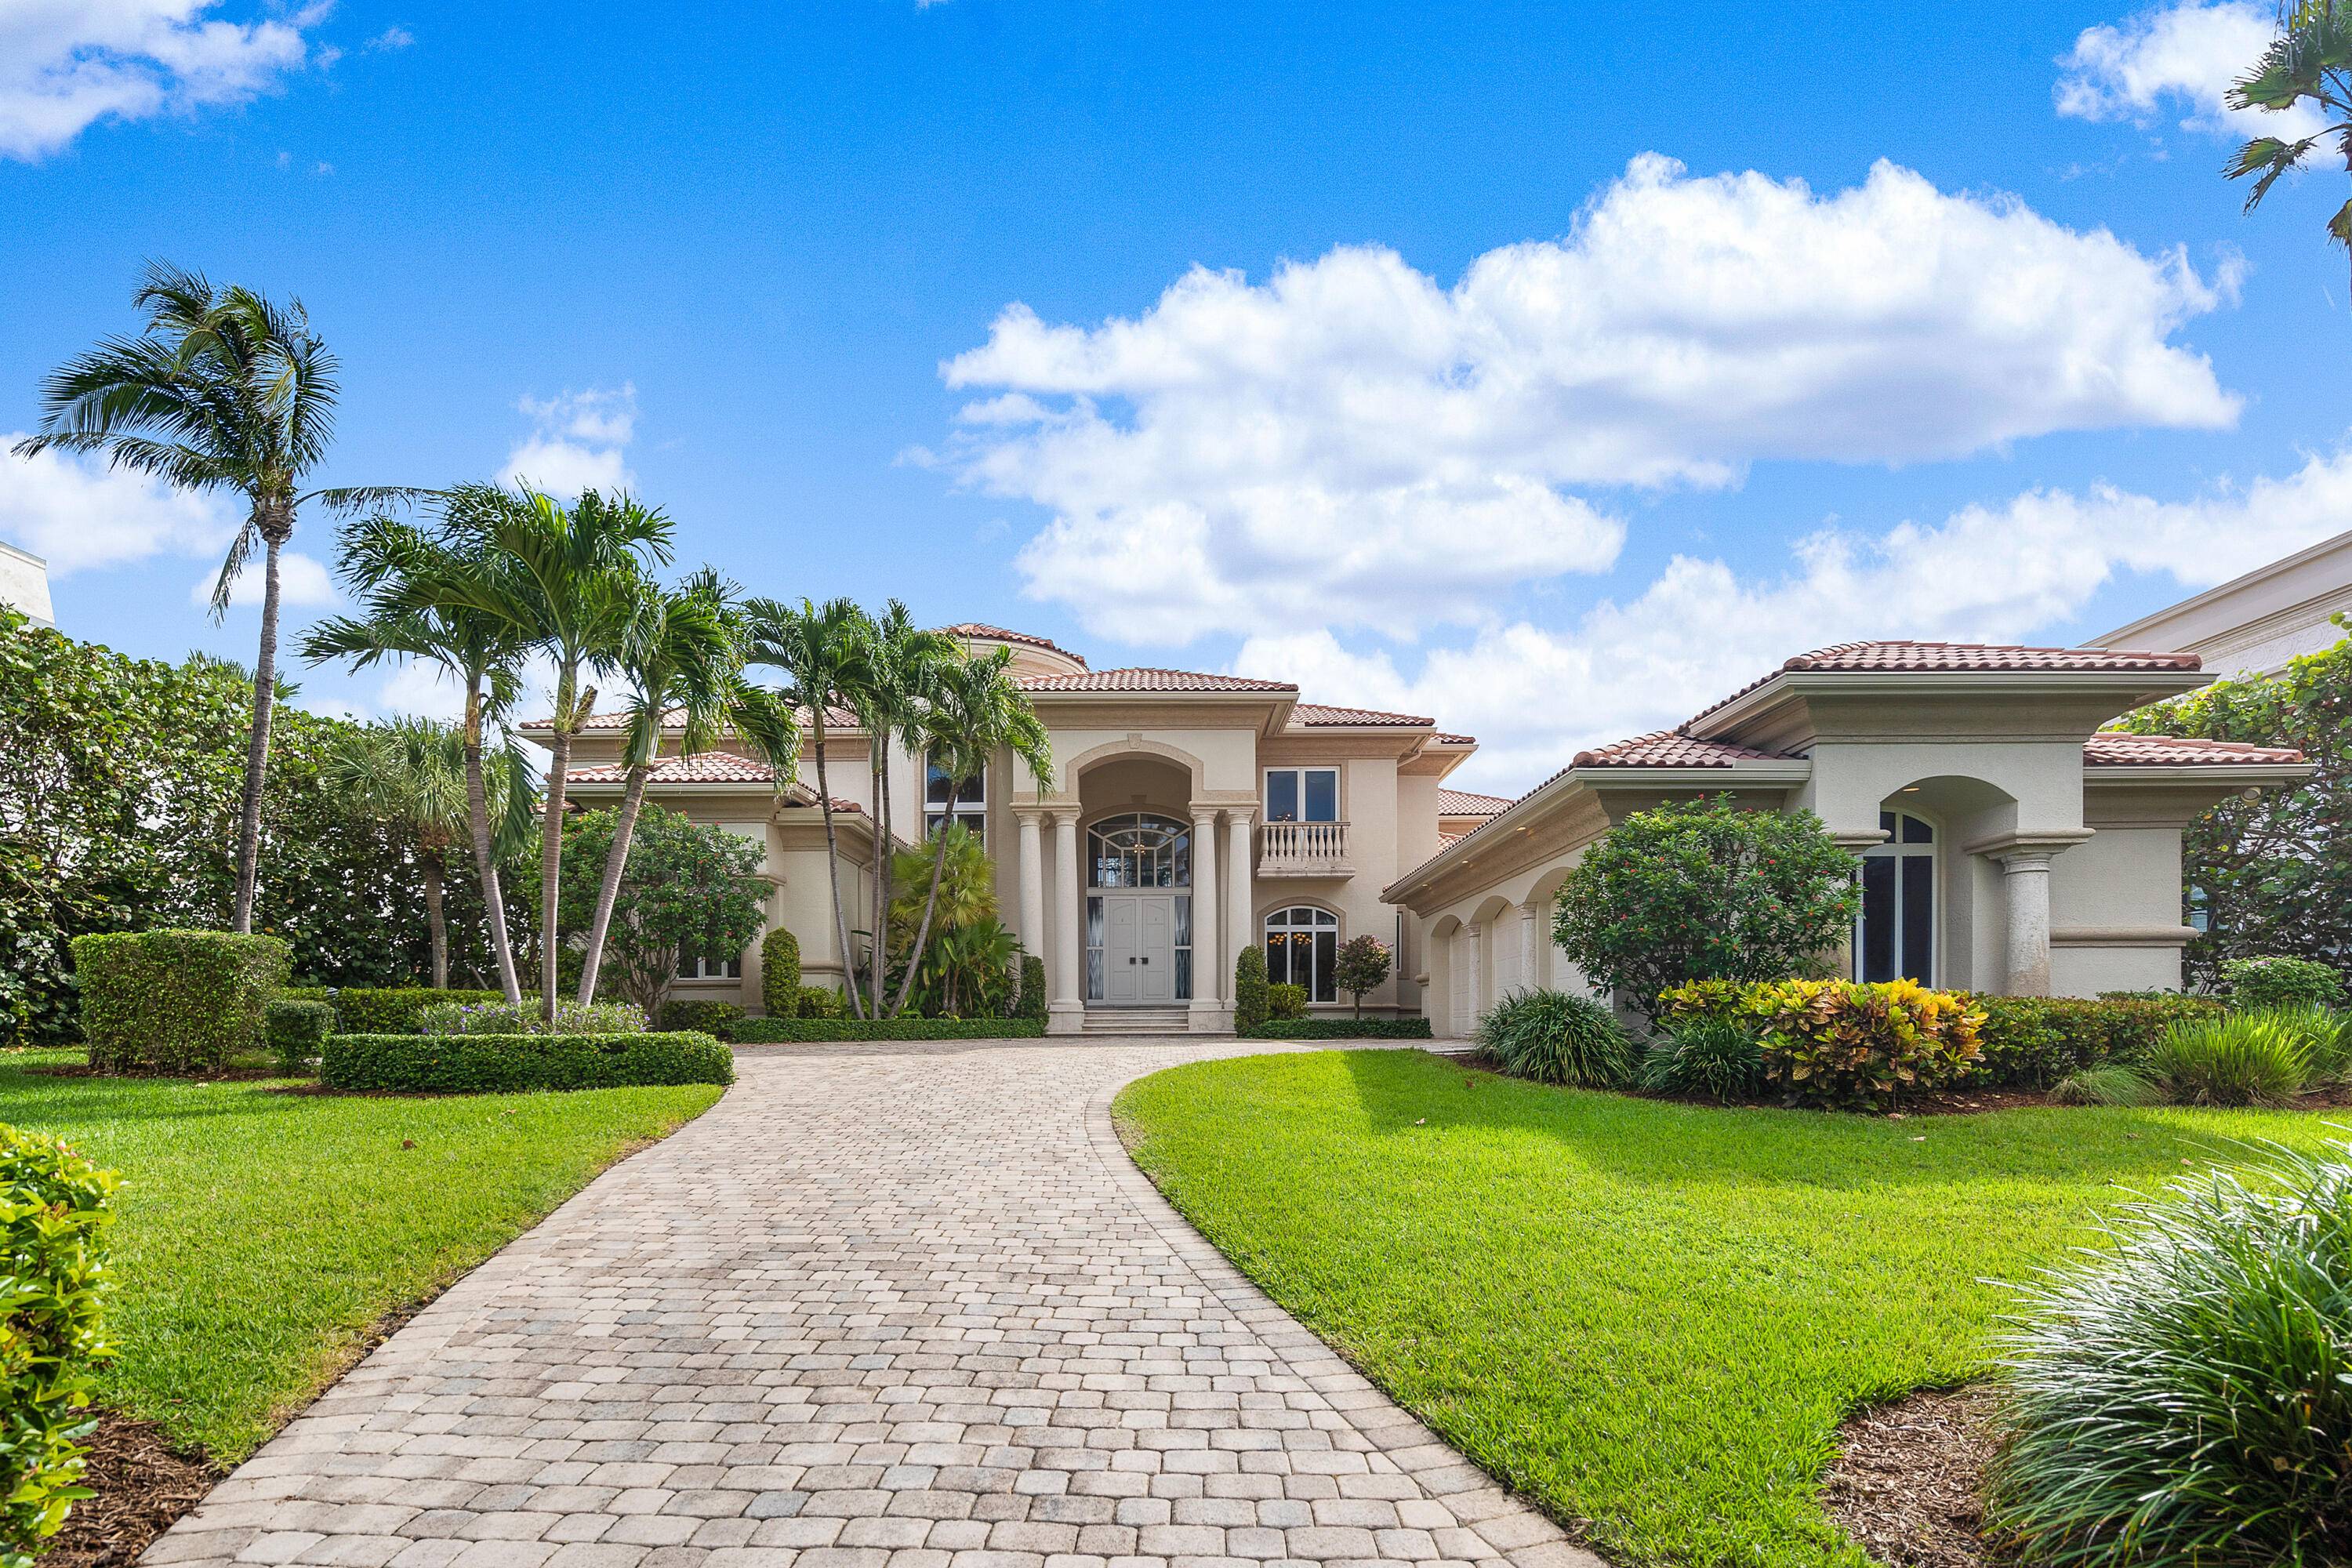 Welcome to your stunning Ocean Front Estate in Ocean Ridge FL now available for the upcoming season.